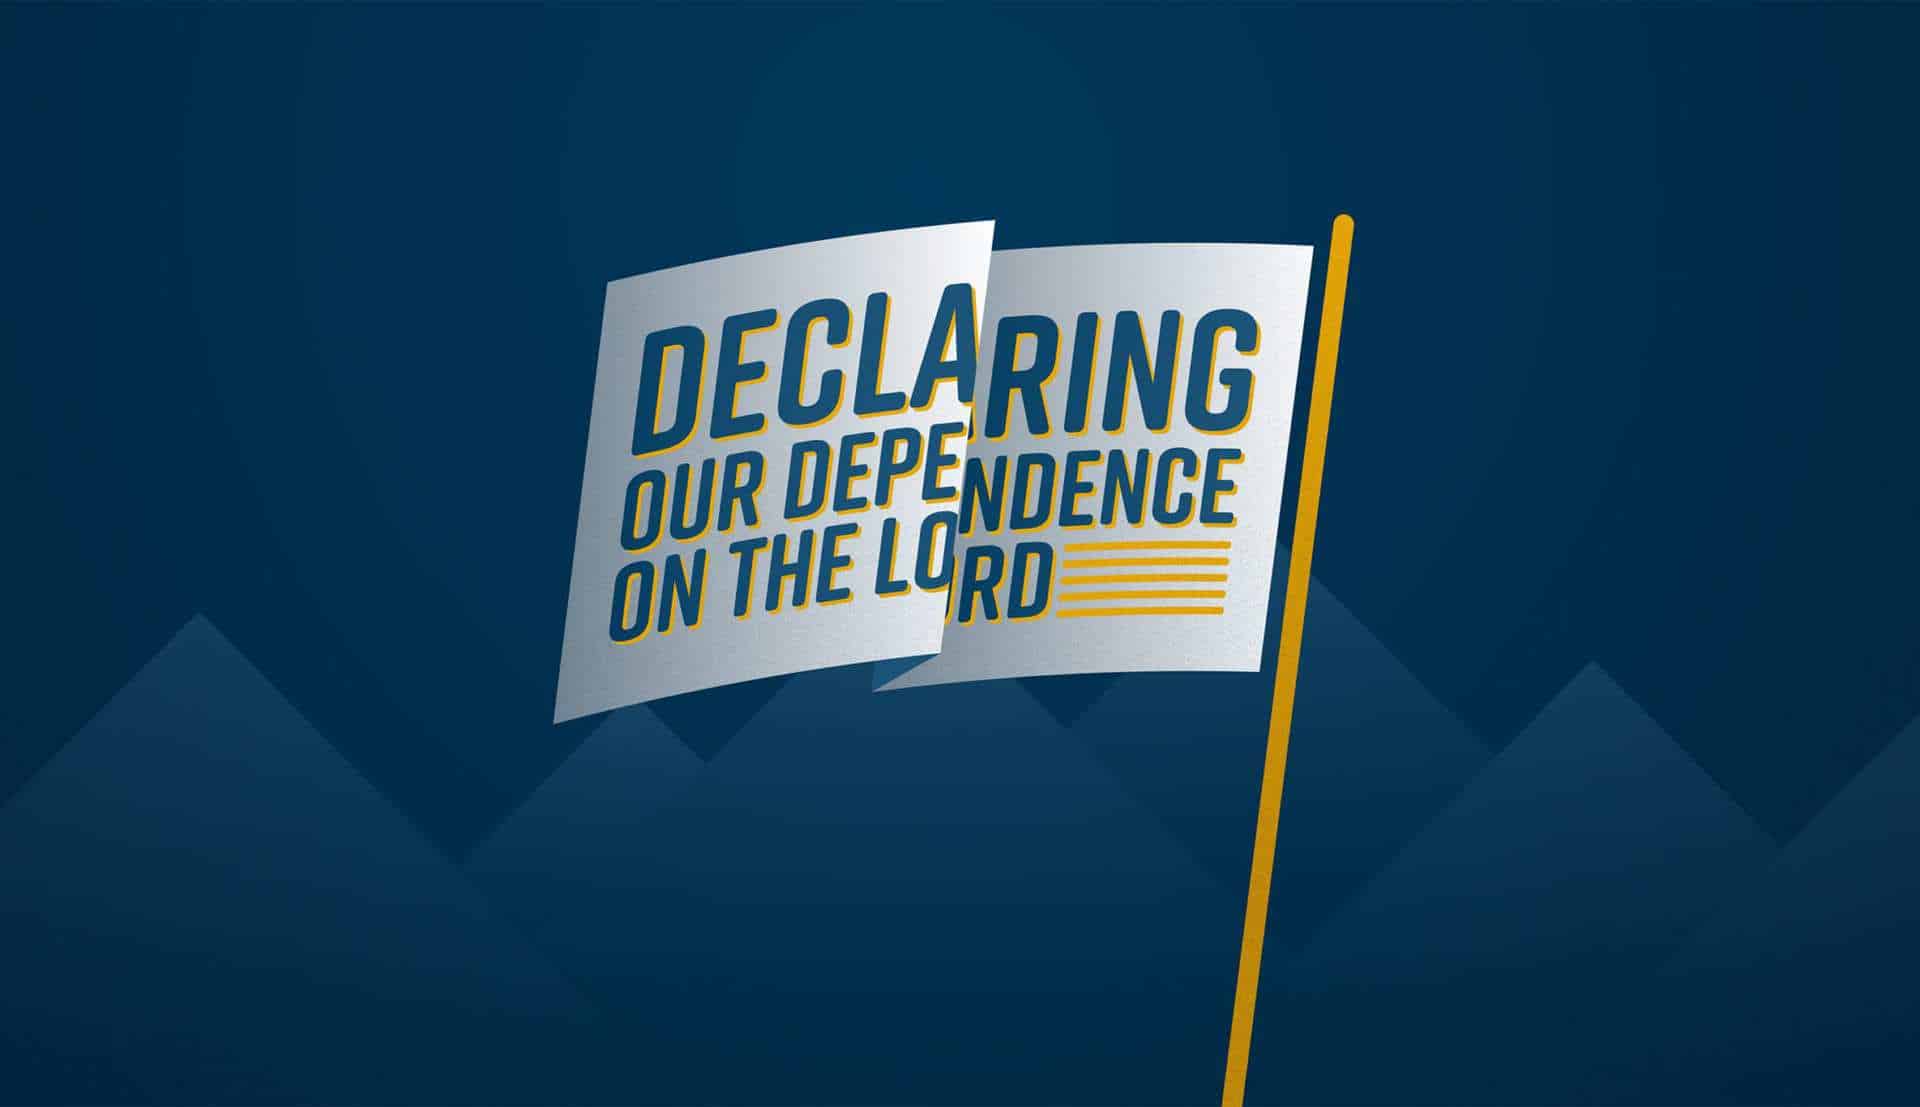 Declaring our dependence on the Lord - Prayer Service - 7/5/20 Image